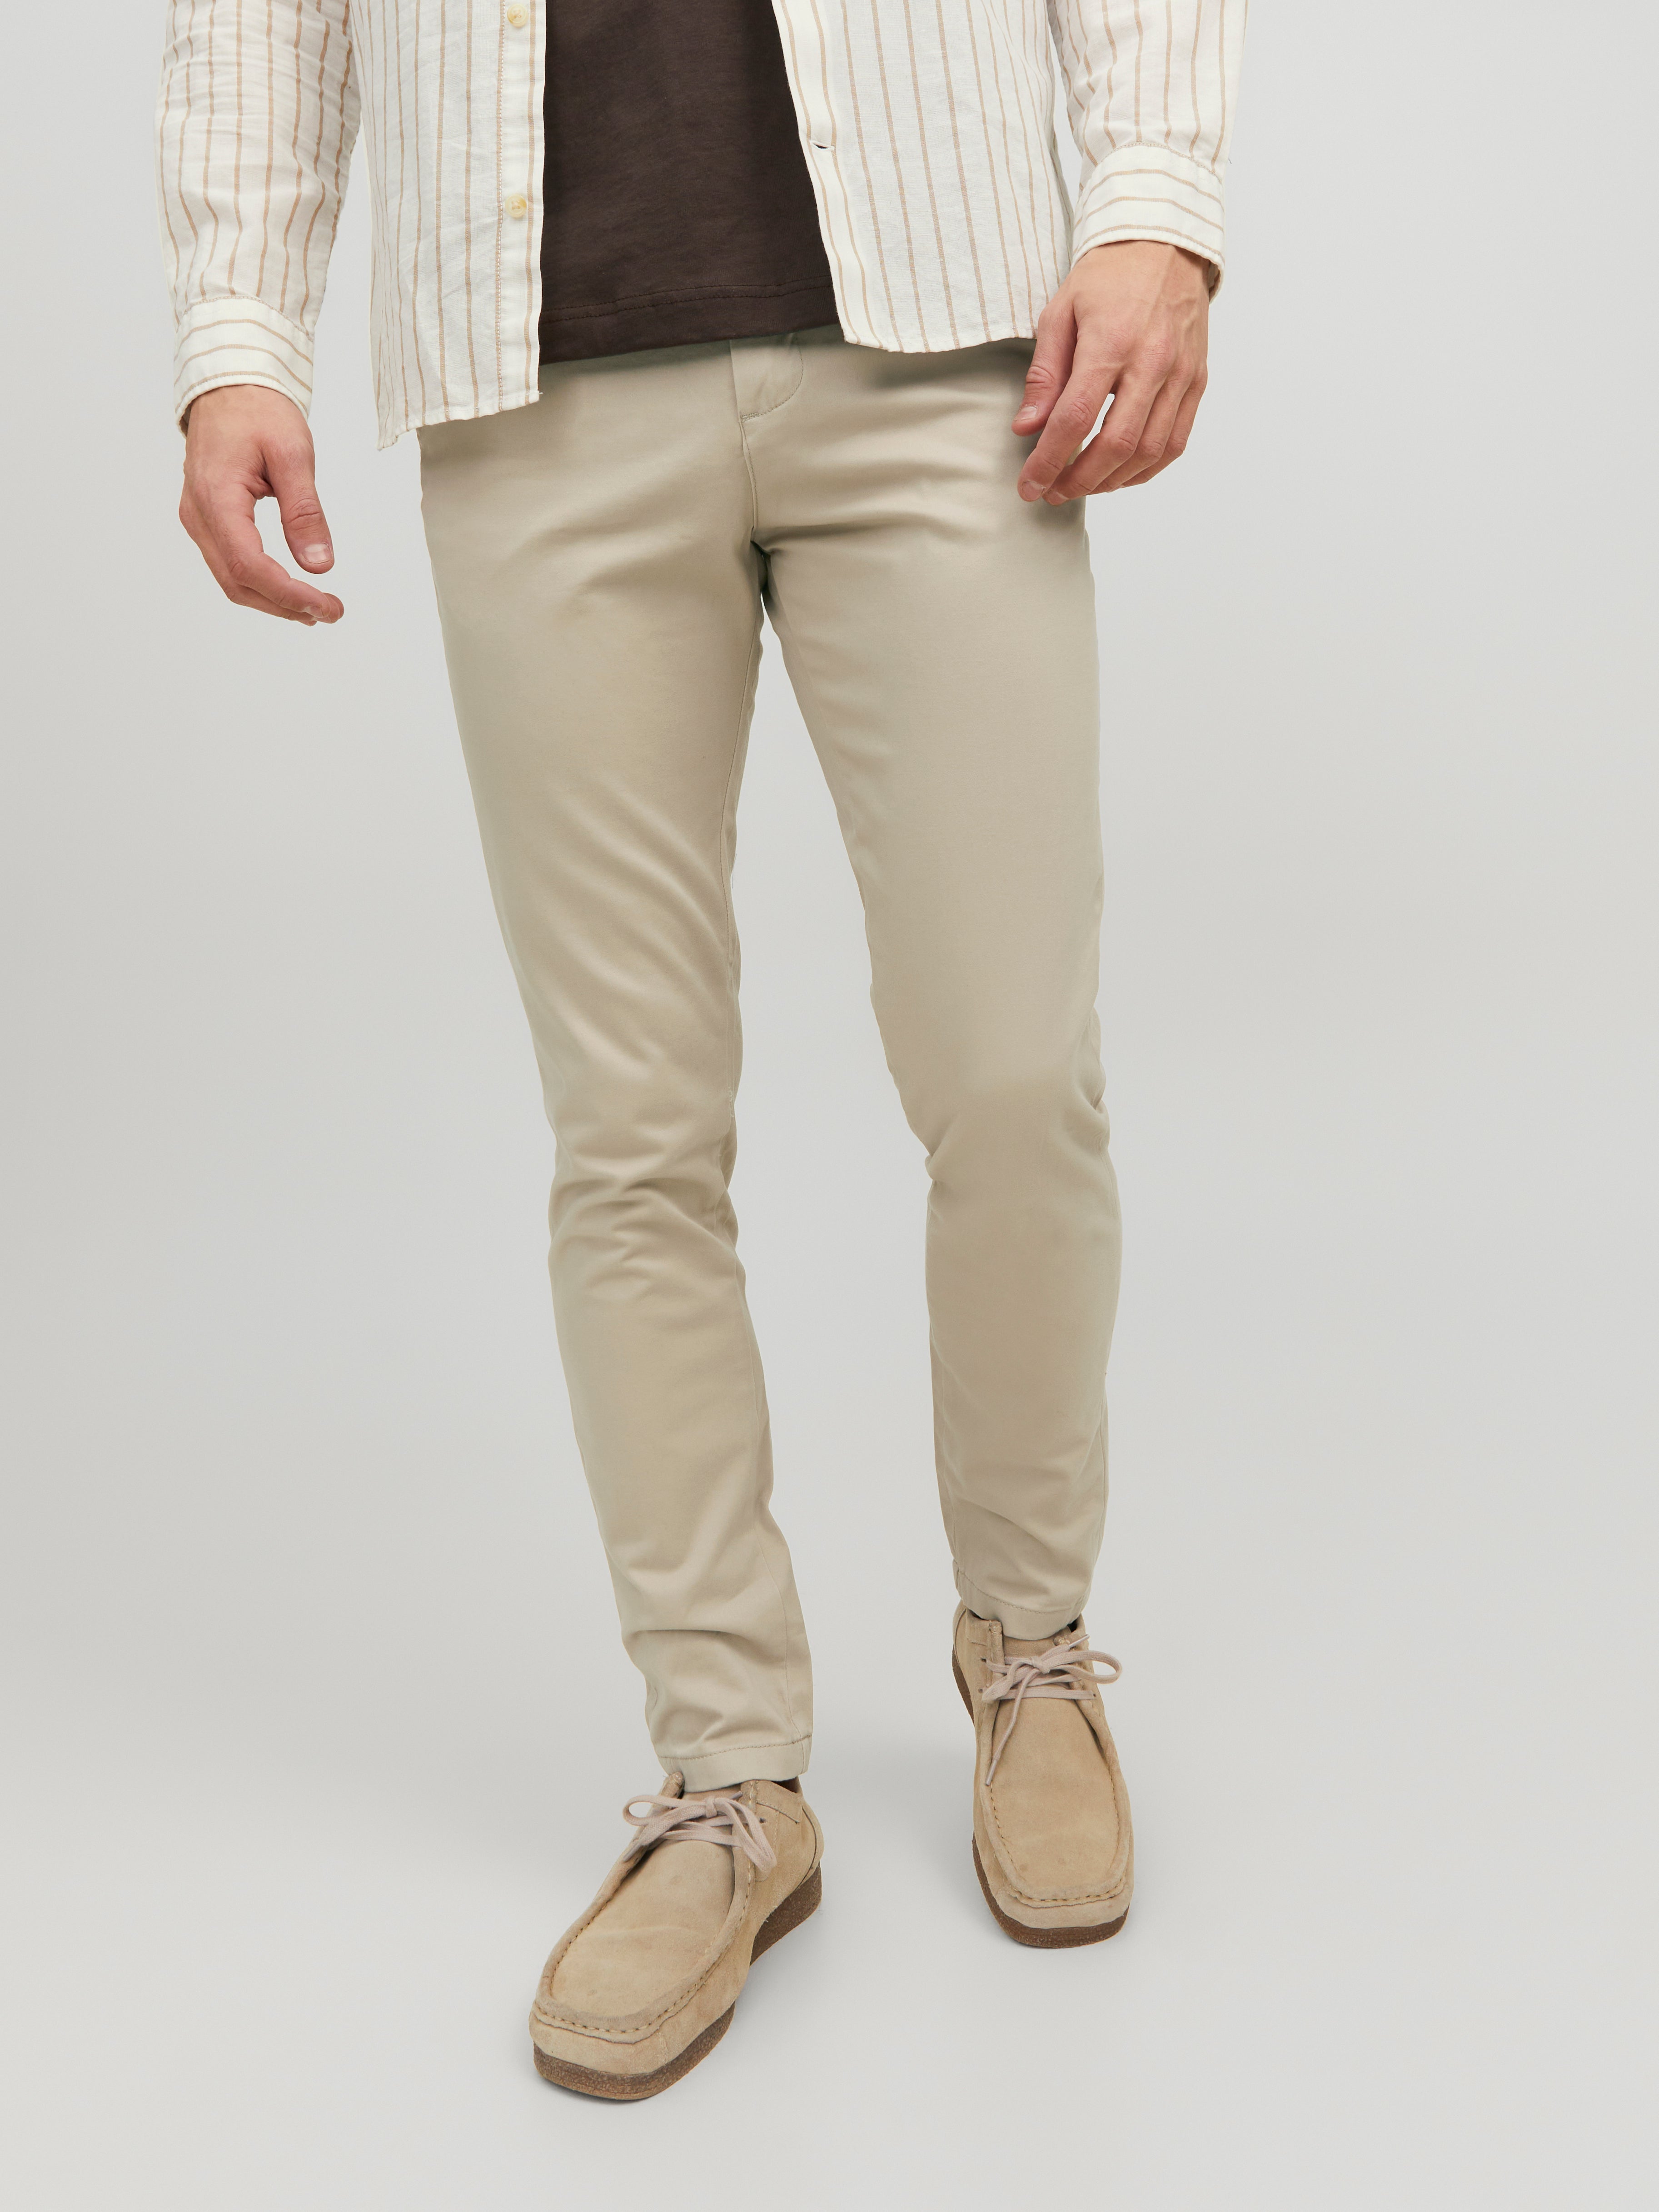 The Slim Foundation Chino Pant in Organic Marine Blue | Men's Bottoms |  Taylor Stitch